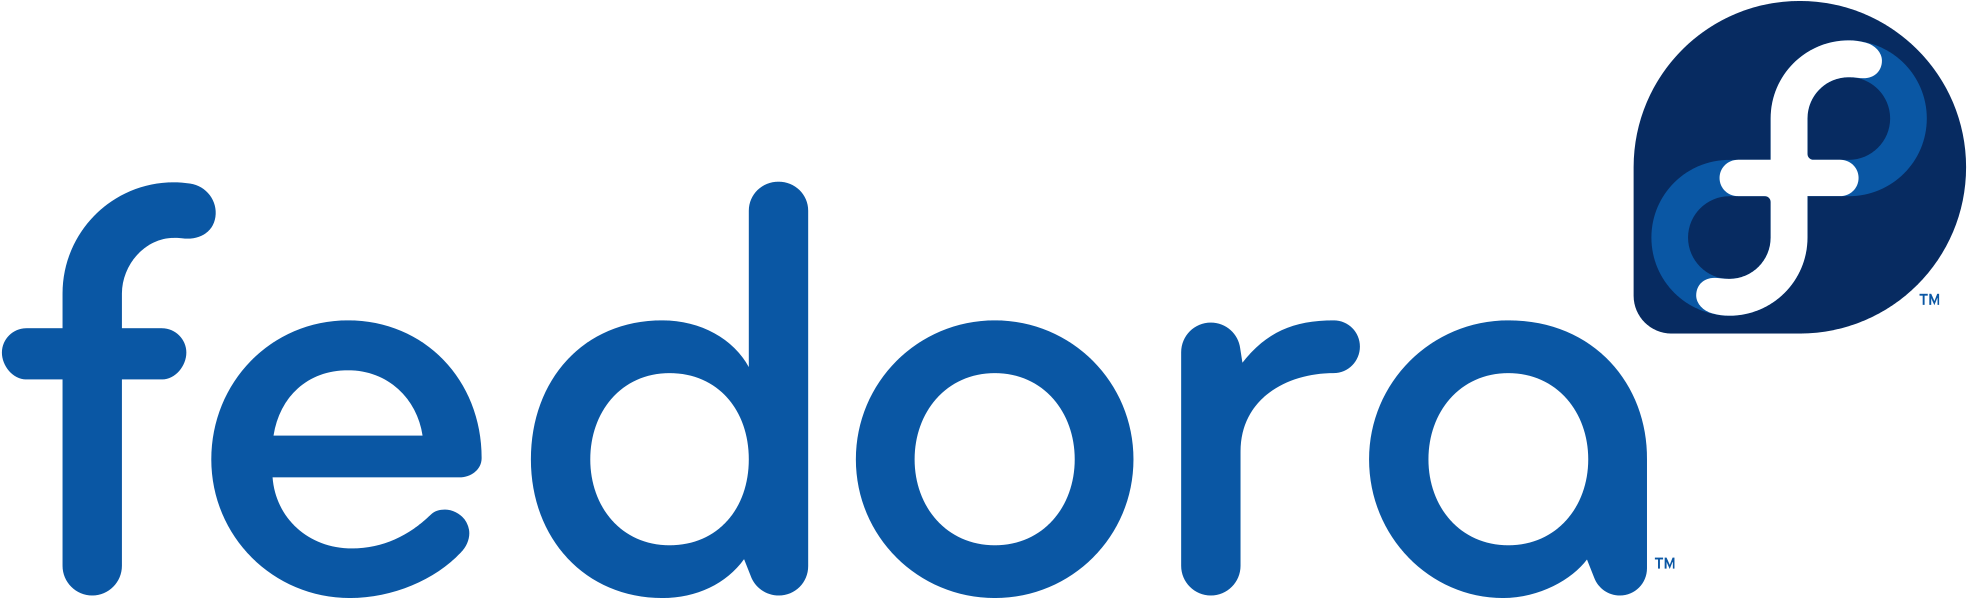 Fedora Logo And Wordmark - Fedora Linux Logo Png Clipart (1280x405), Png Download